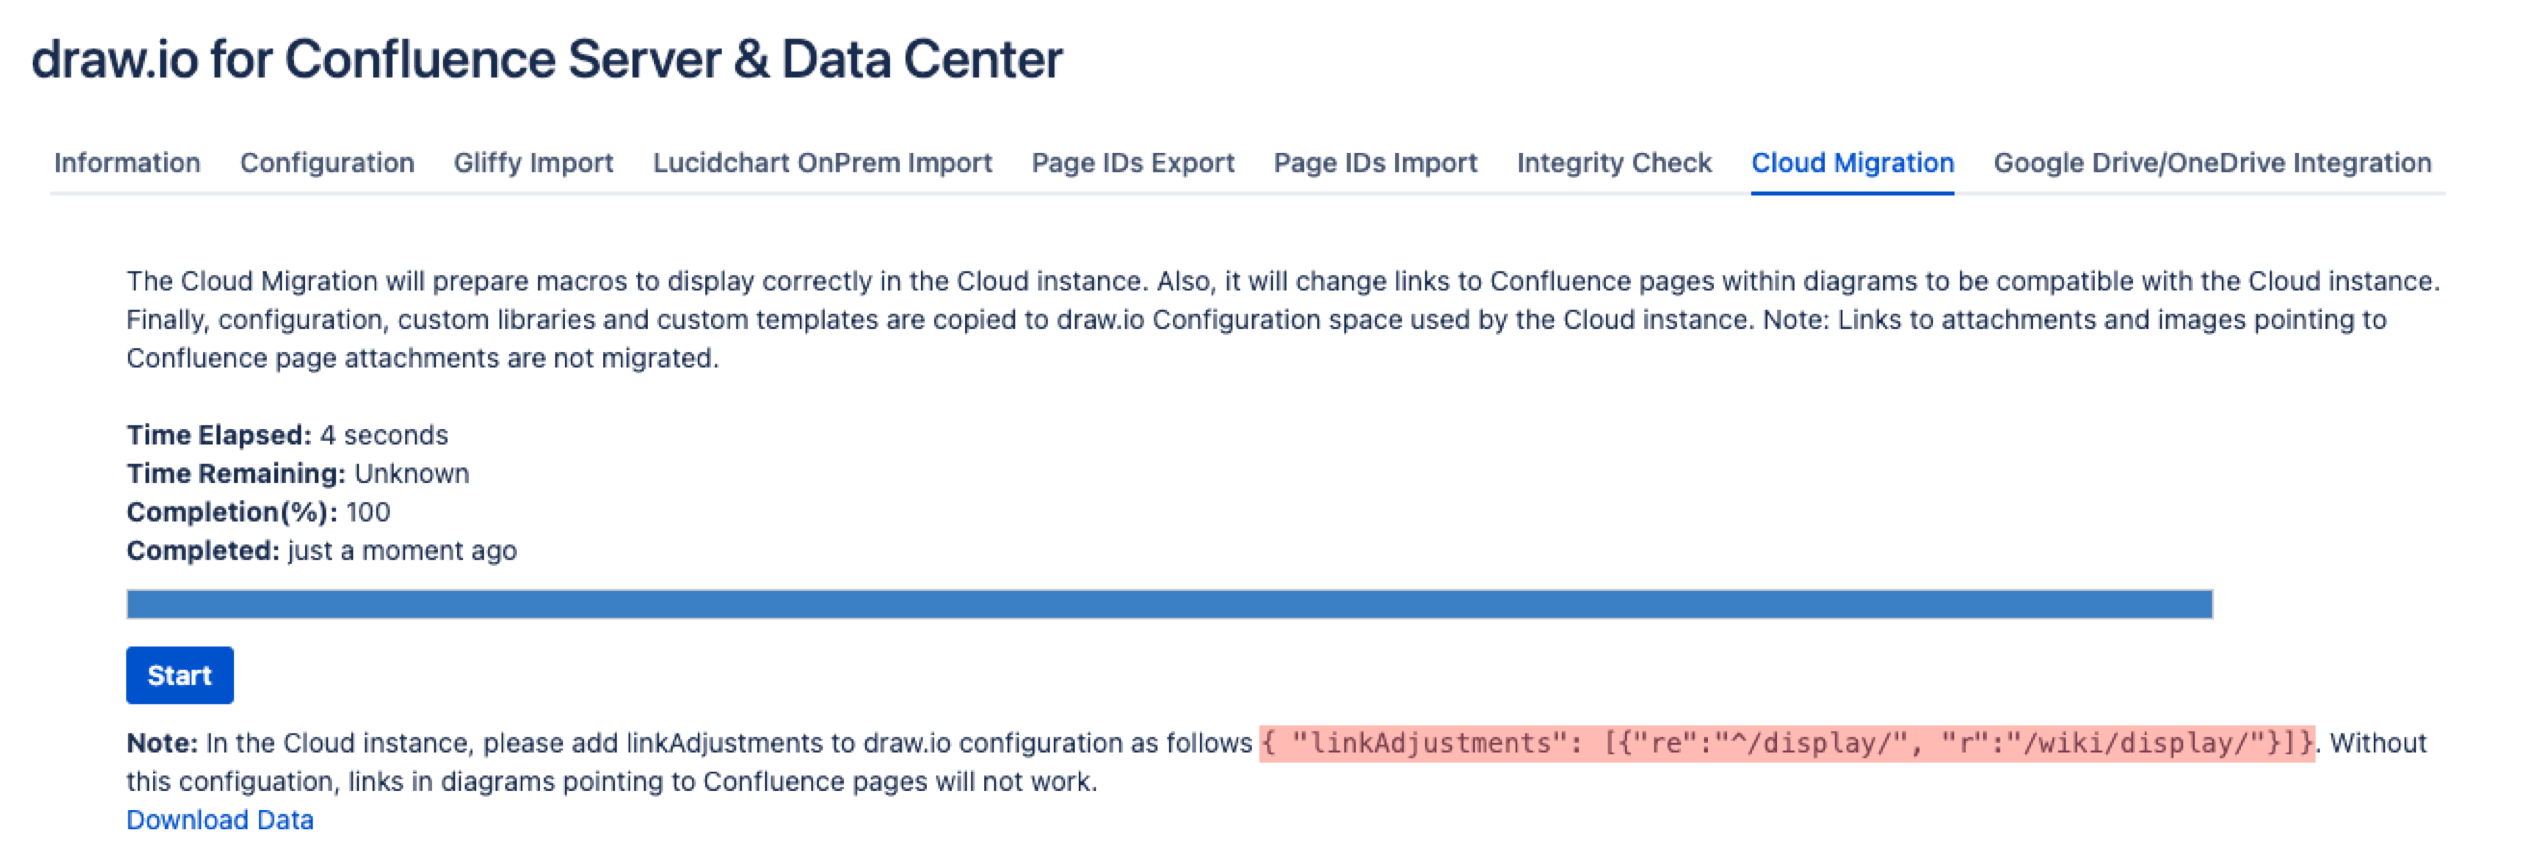 Copy the configuration command - you'll need to paste this into the draw.io configuration in your Cloud instance